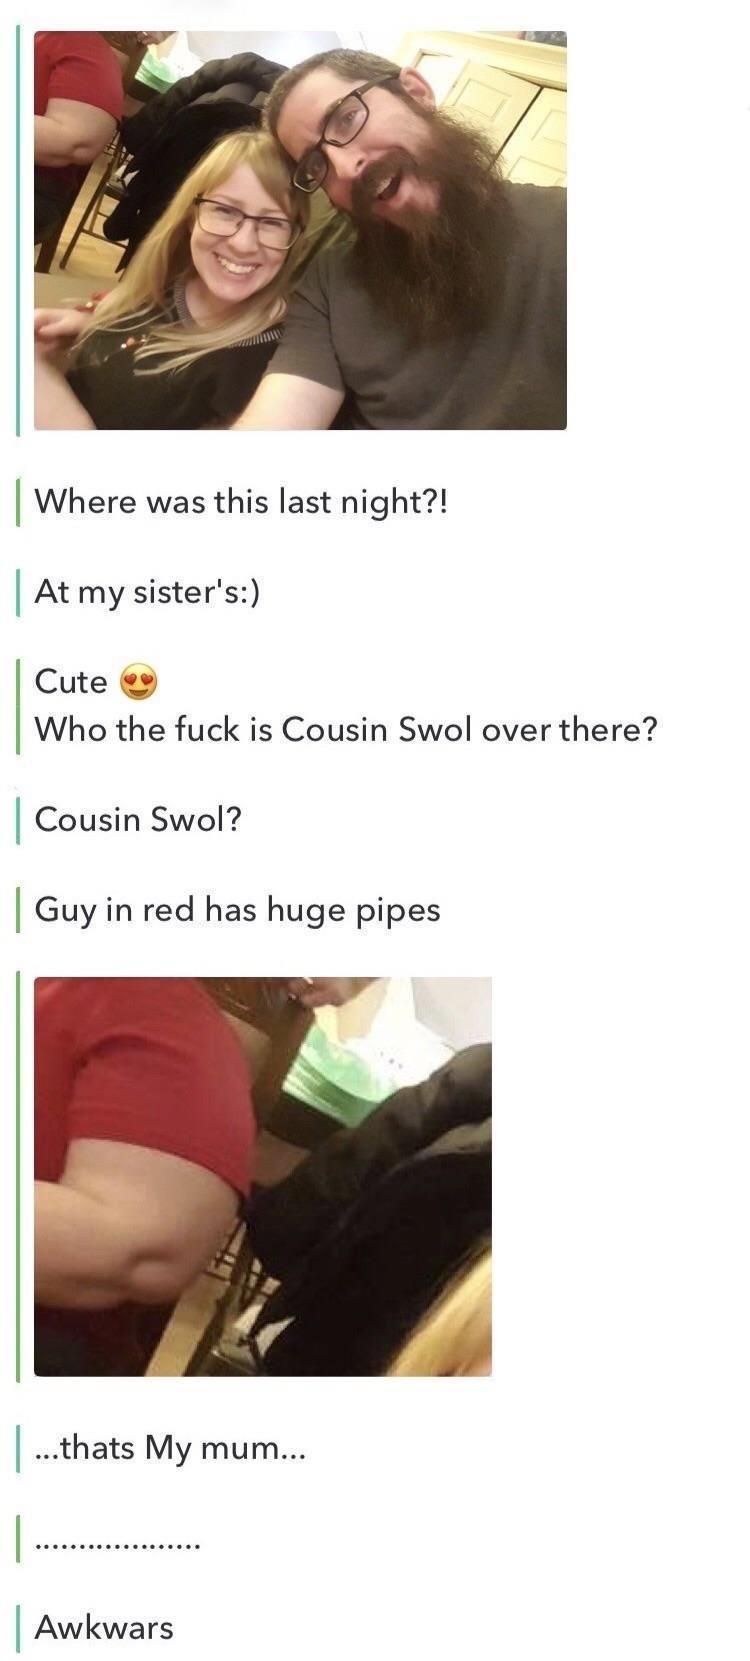 cousin swol - Where was this last night?! At my sister's Cute Who the fuck is Cousin Swol over there? Cousin Swol? Guy in red has huge pipes ...thats My mum... Awkwars